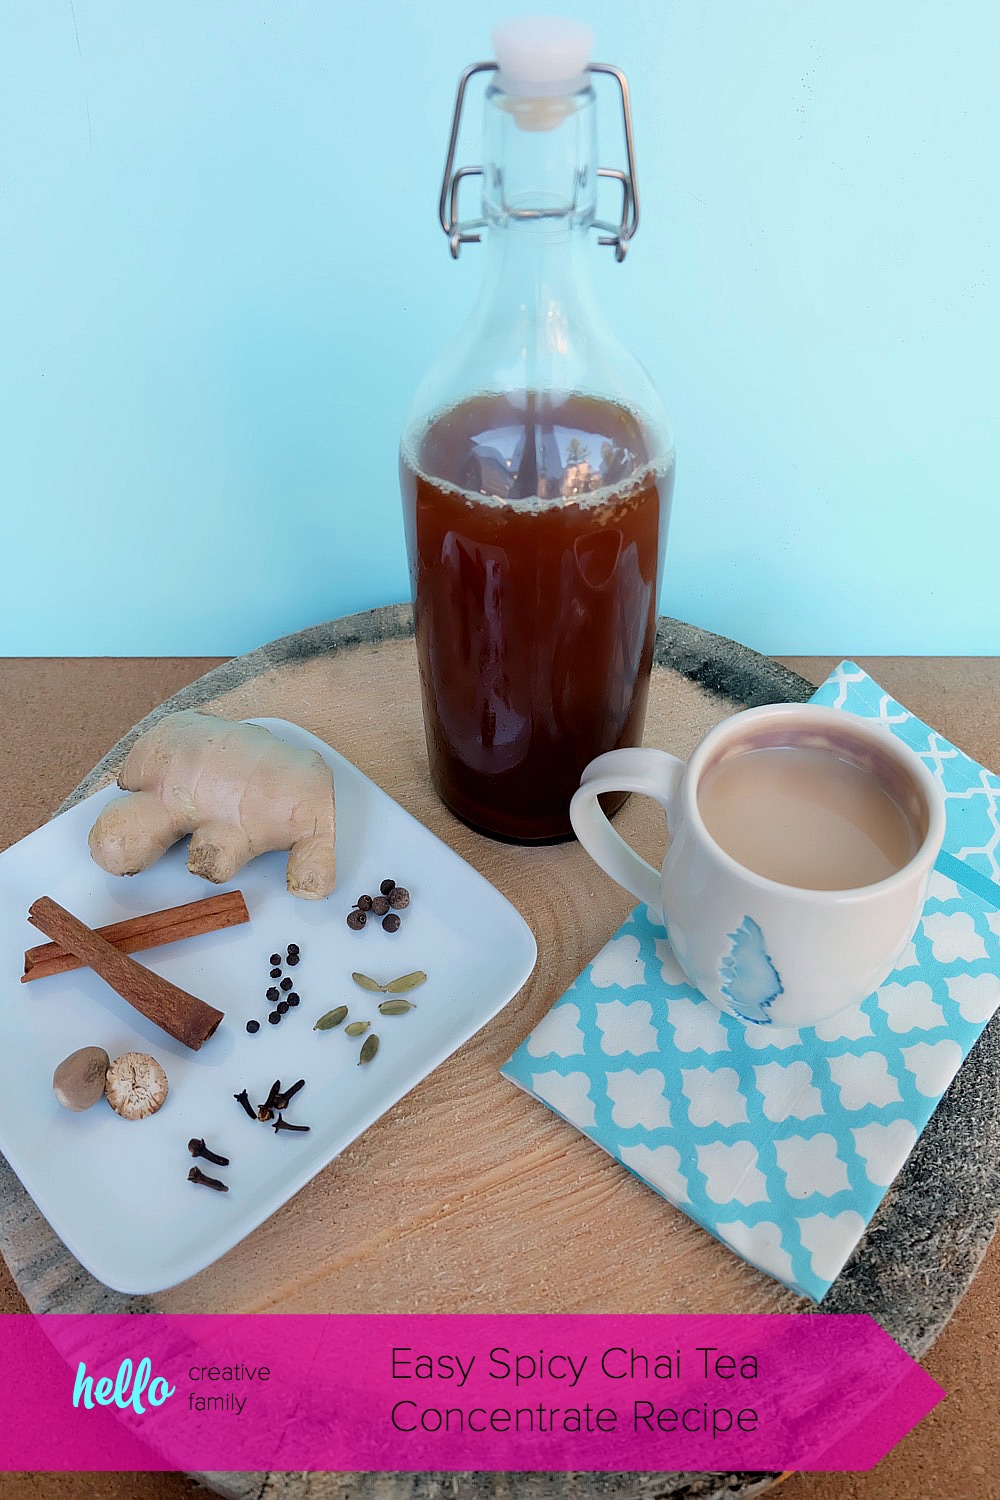 Move over Starbucks! This spicy chai tea concentrate recipe is simple to make and can be stored in the fridge for an easy cup of chai tea in minutes! Filled with ginger and cinnamon it packs quite a spicy kick. It's also perfect for camping! Serve as a chai tea latte or an iced chai. Add this to your weekend meal prep list!